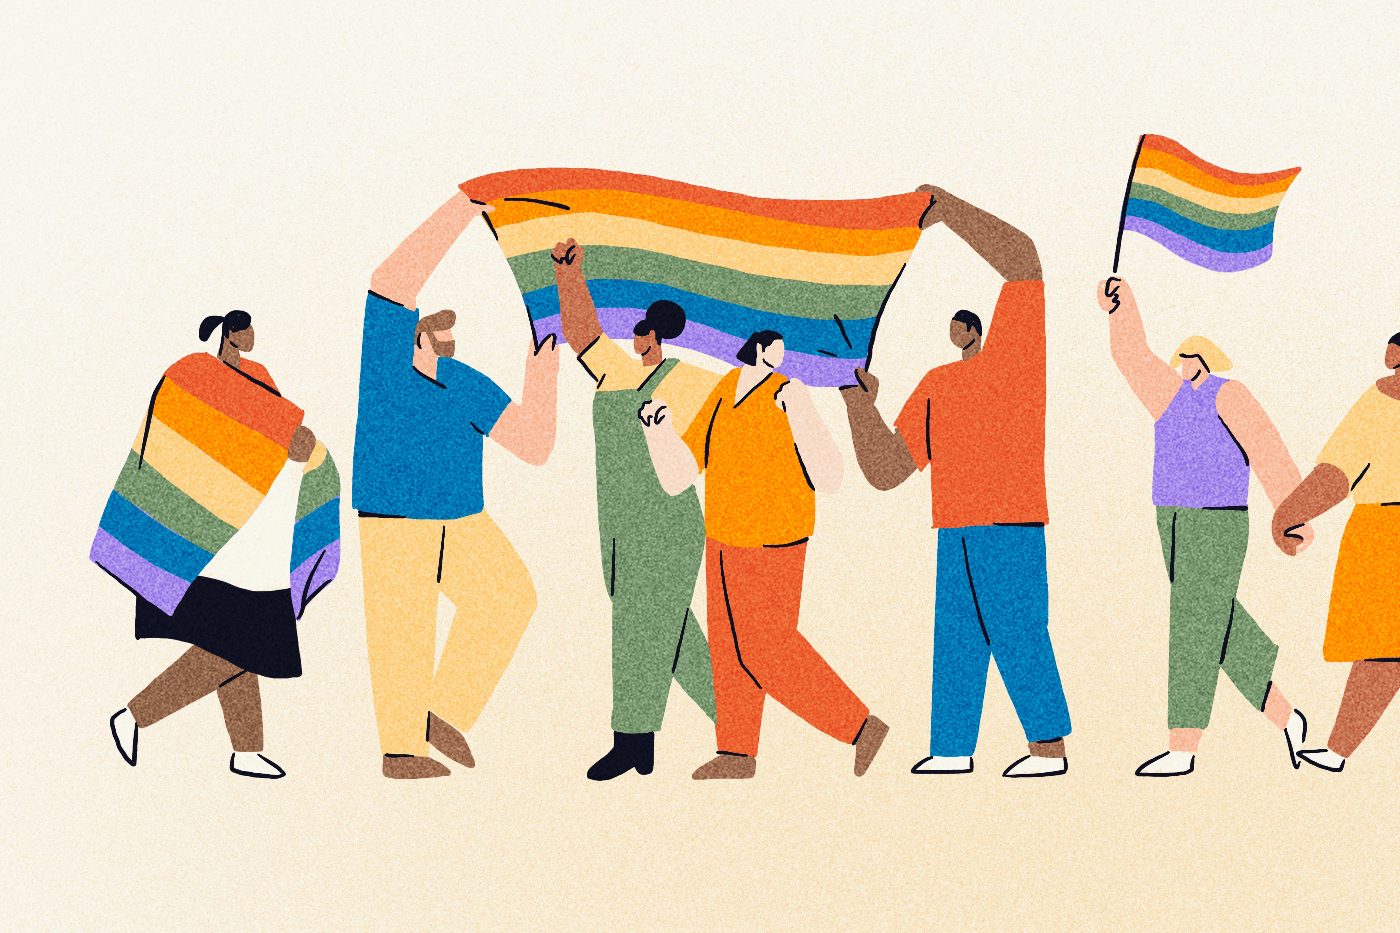 Group of diverse individuals walking in a parade with rainbow flags